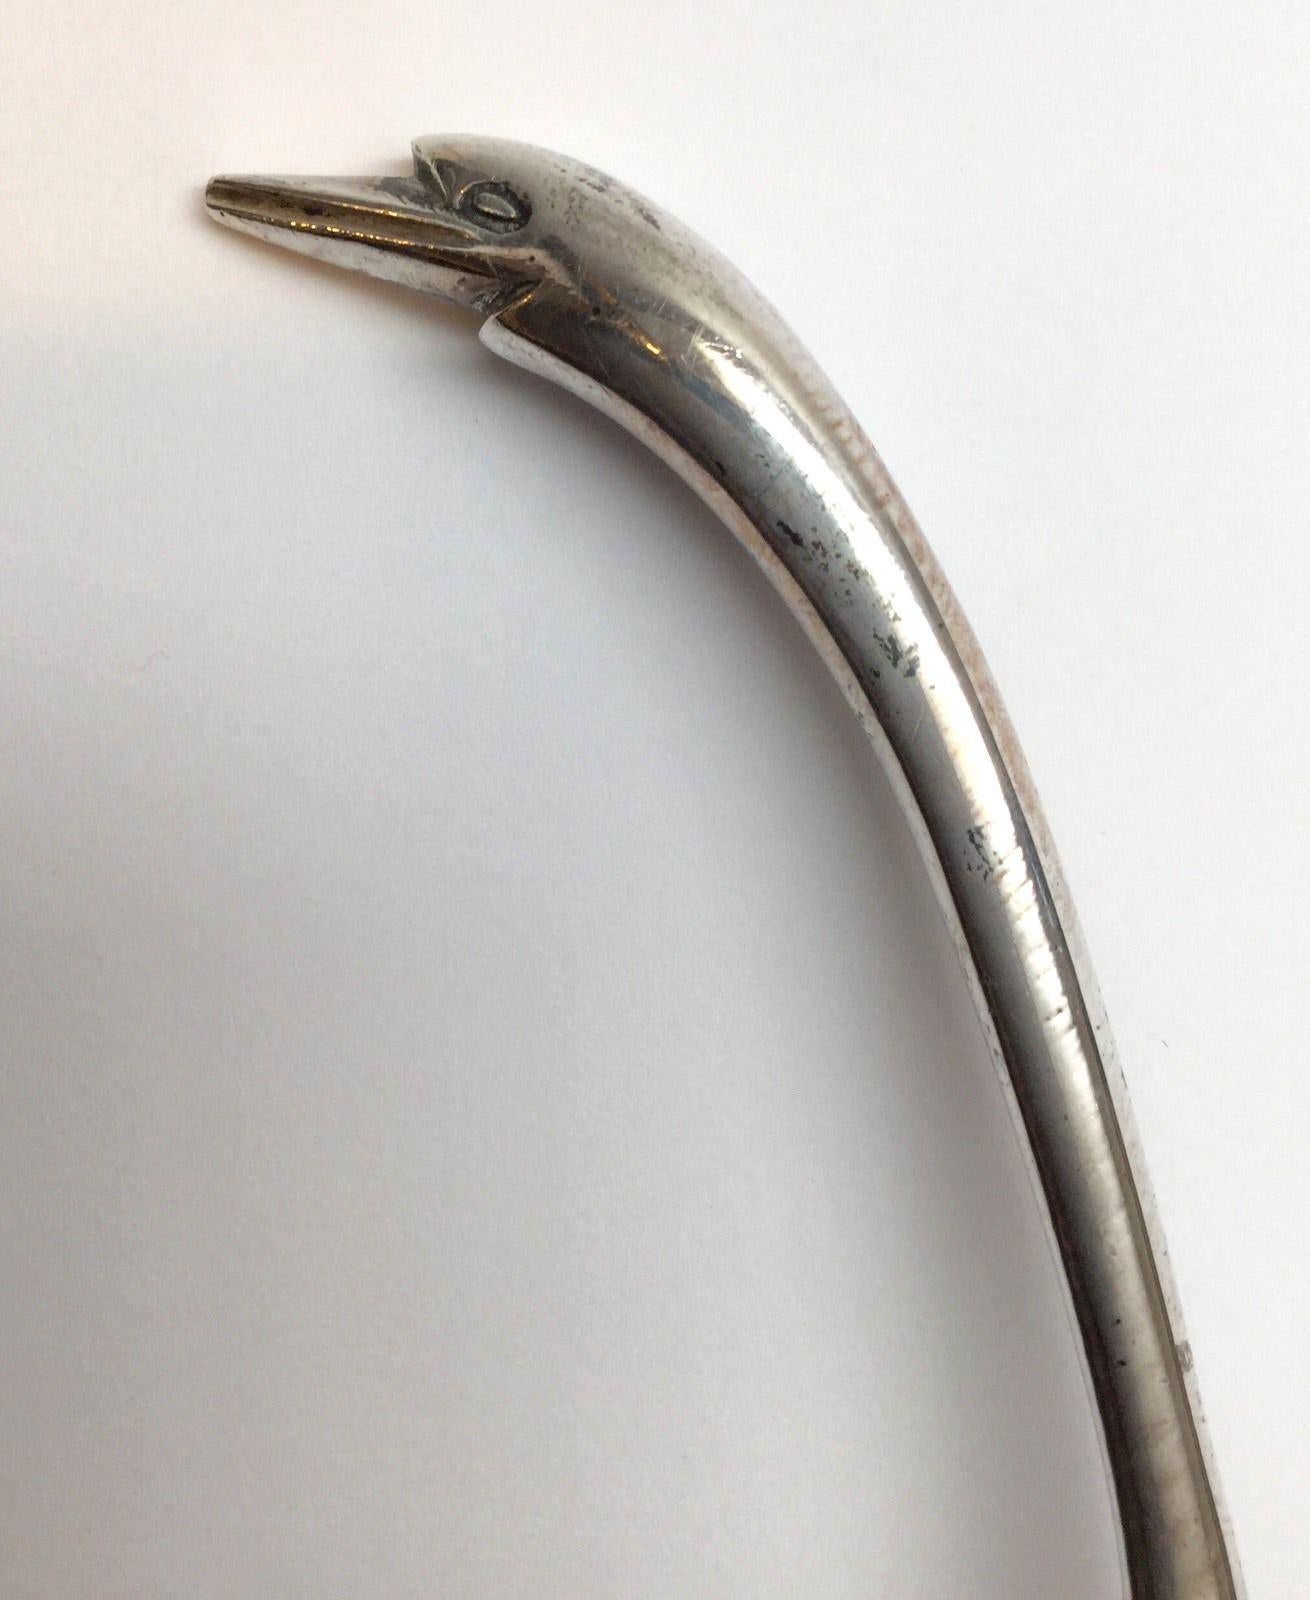 Mexico Sterling silver duck head handle drizzle spoon. 
Marked: Eagle 9, 925, Mexico STERLING. 
Measures: 8